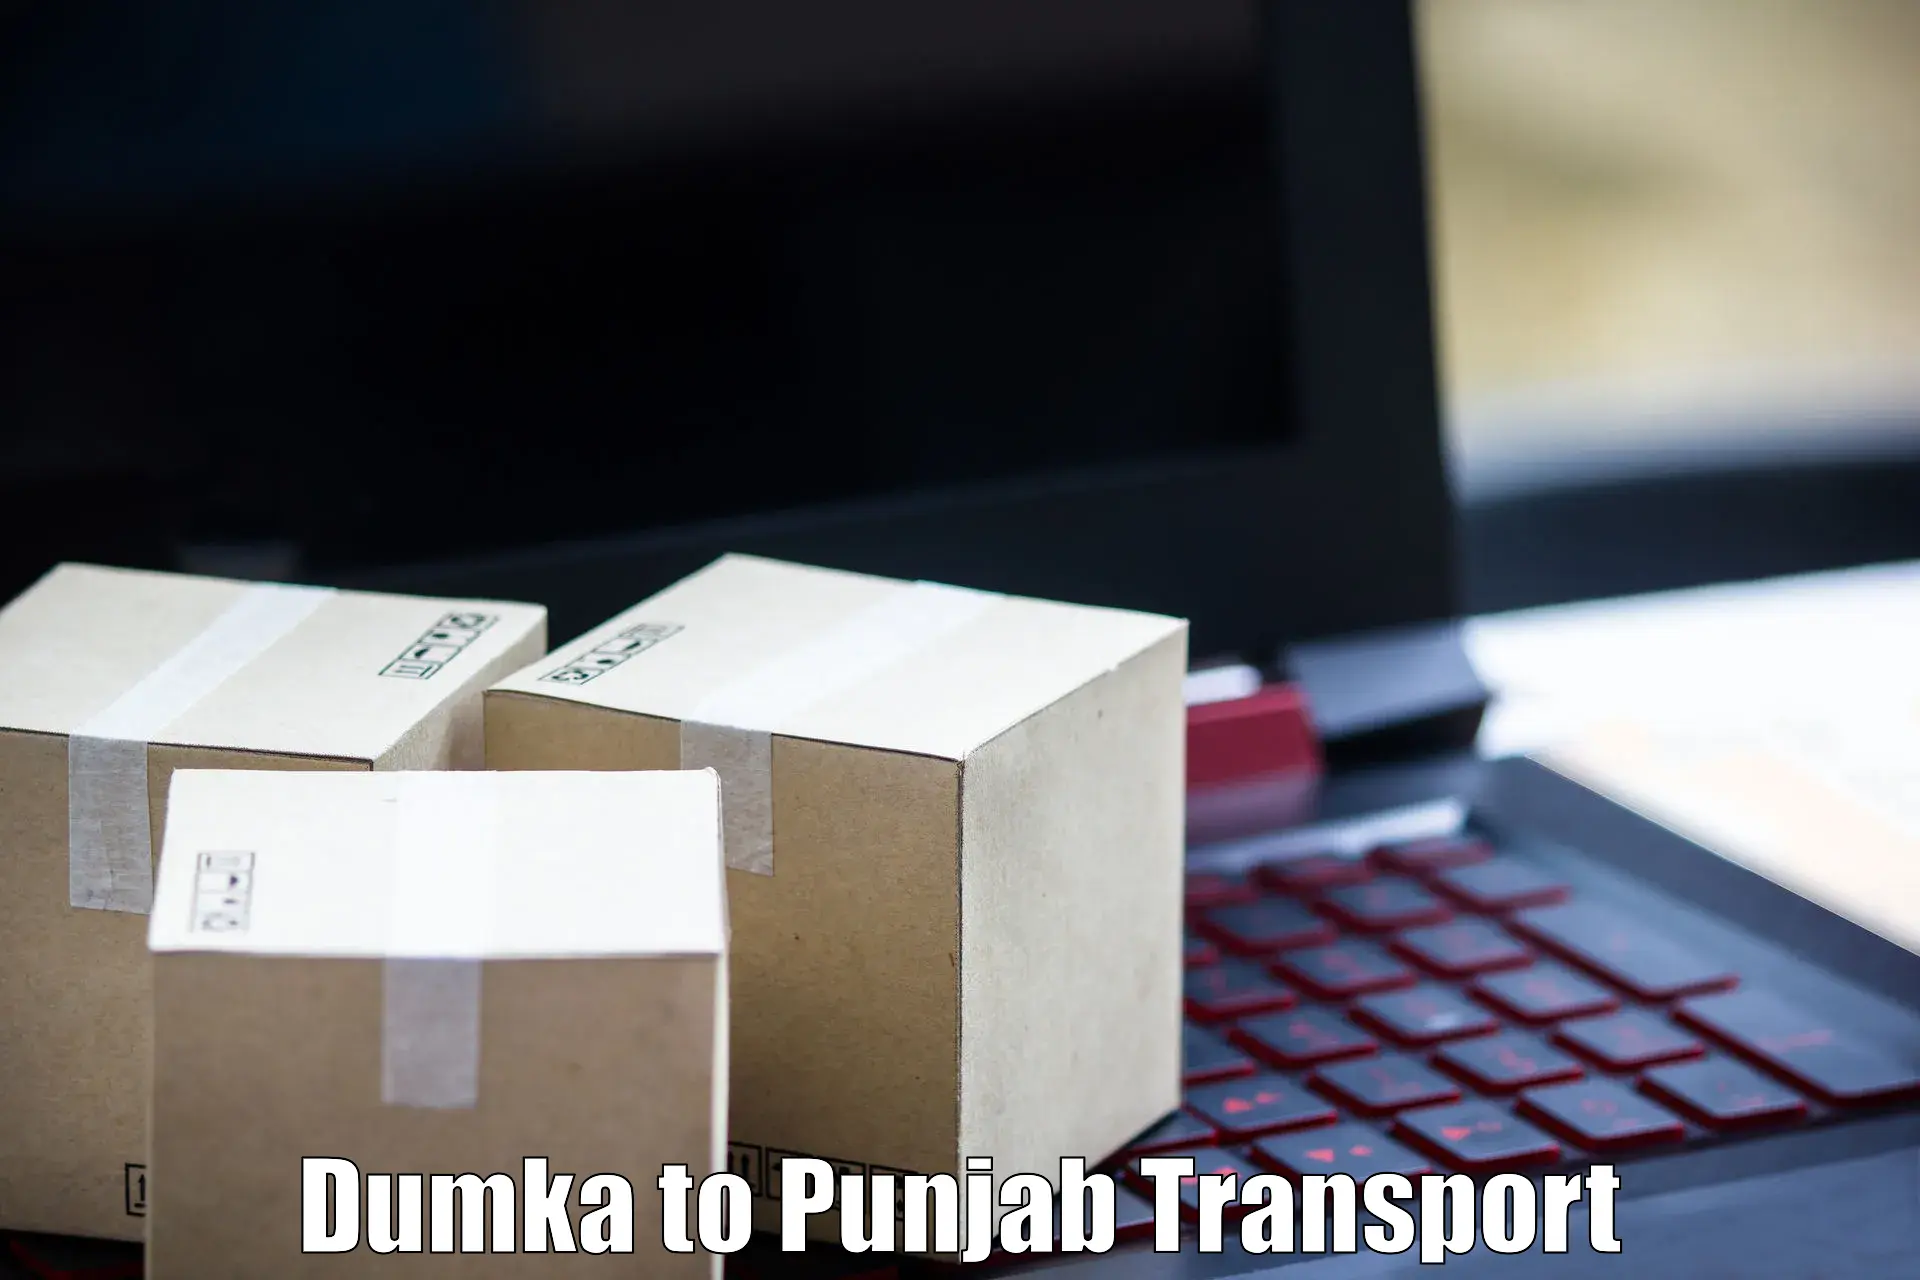 Road transport online services Dumka to Sultanpur Lodhi